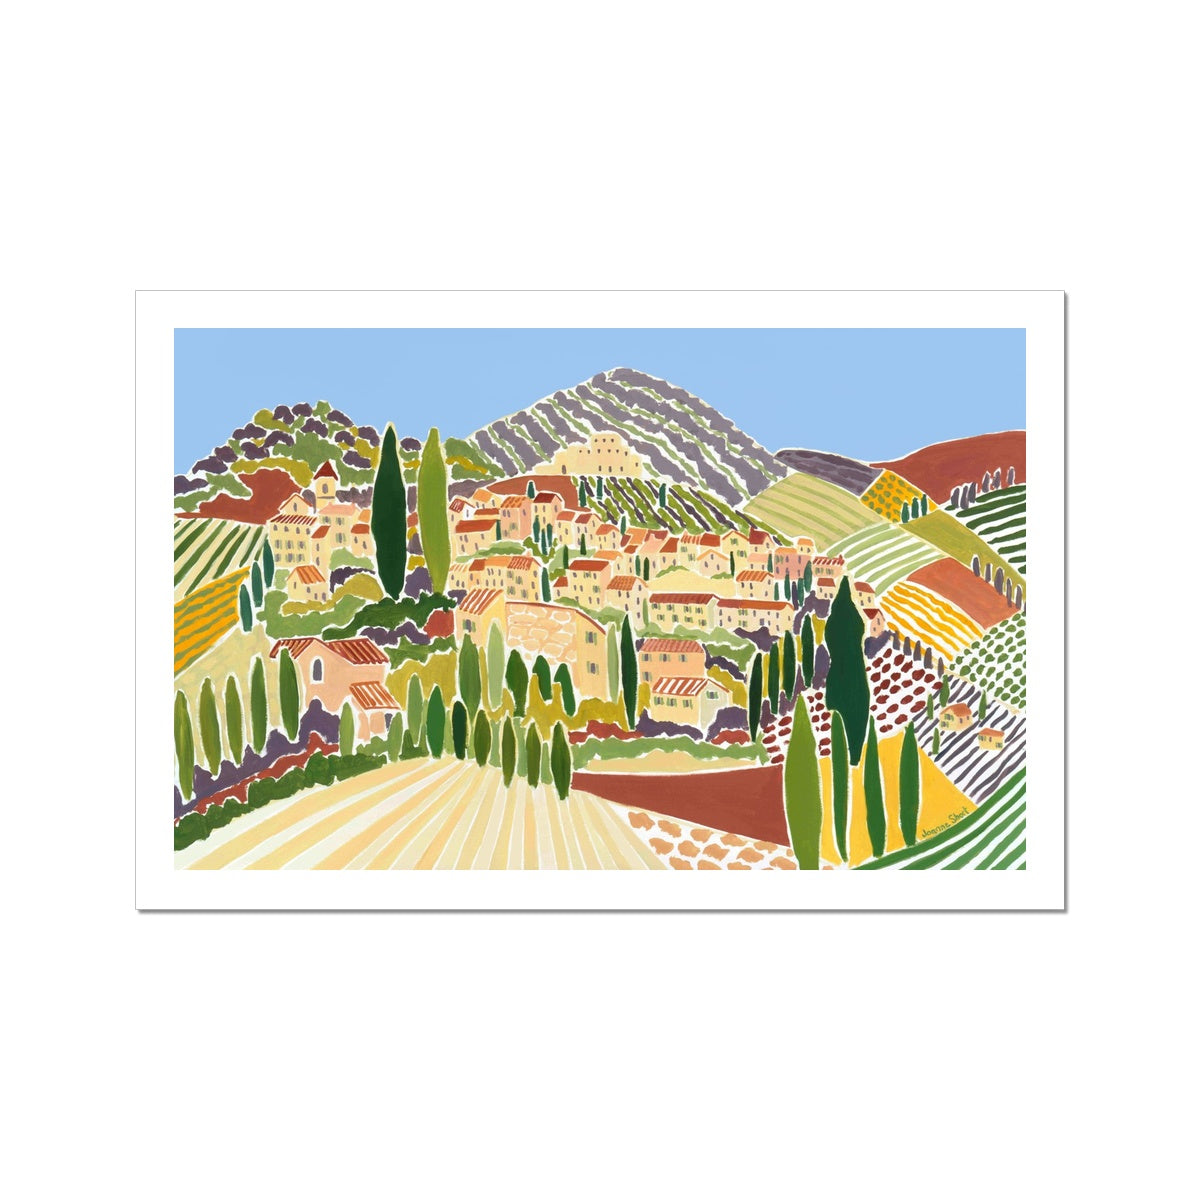 Joanne Short Fine Art Open Edition French Art Print. 'The Old Town, Vaison La Romaine'. French Art Gallery